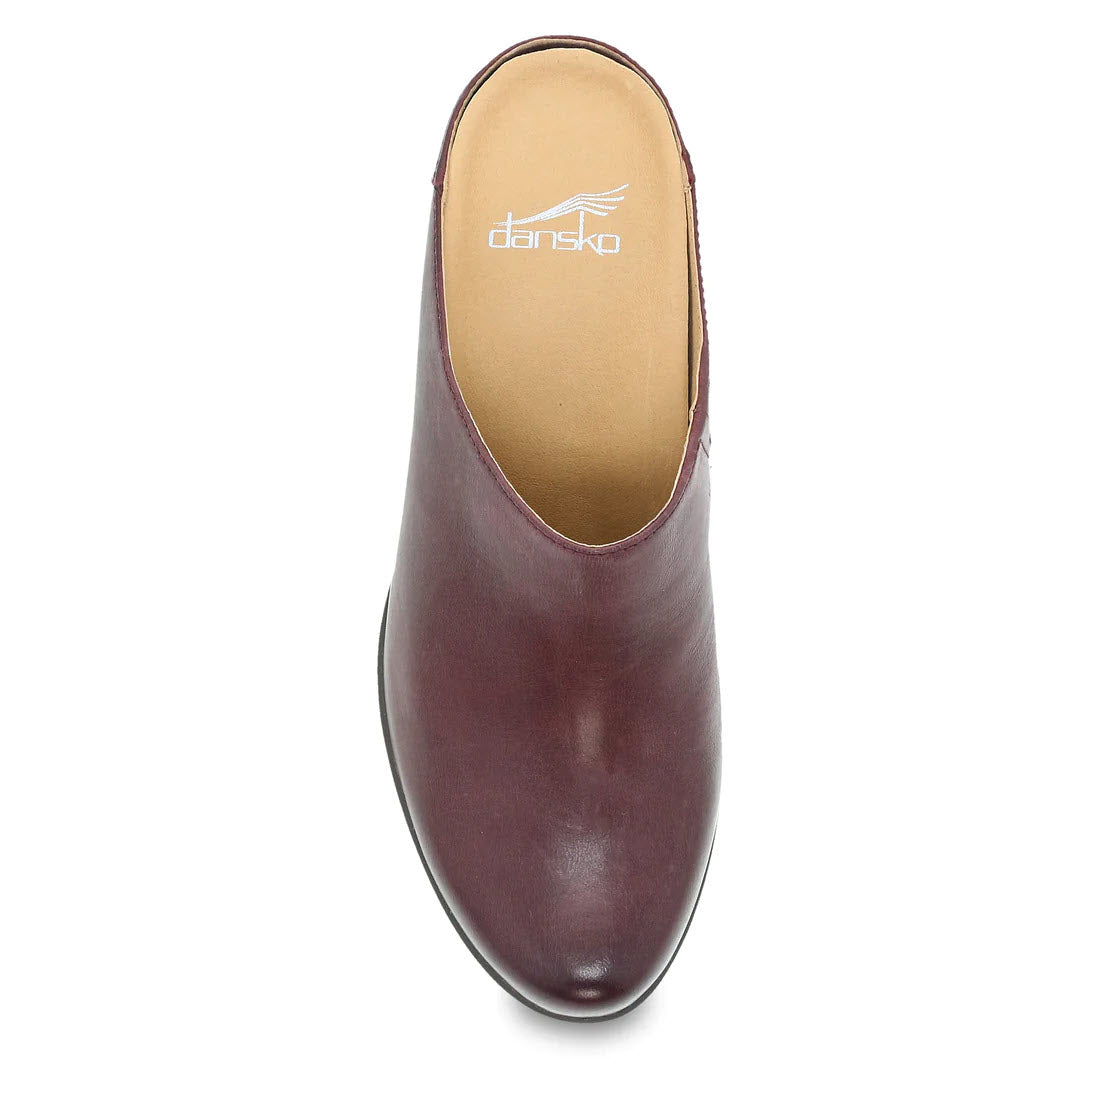 Top view of a burgundy Dansko Carrie Wine Burnished backless mule leather shoe on a white background.